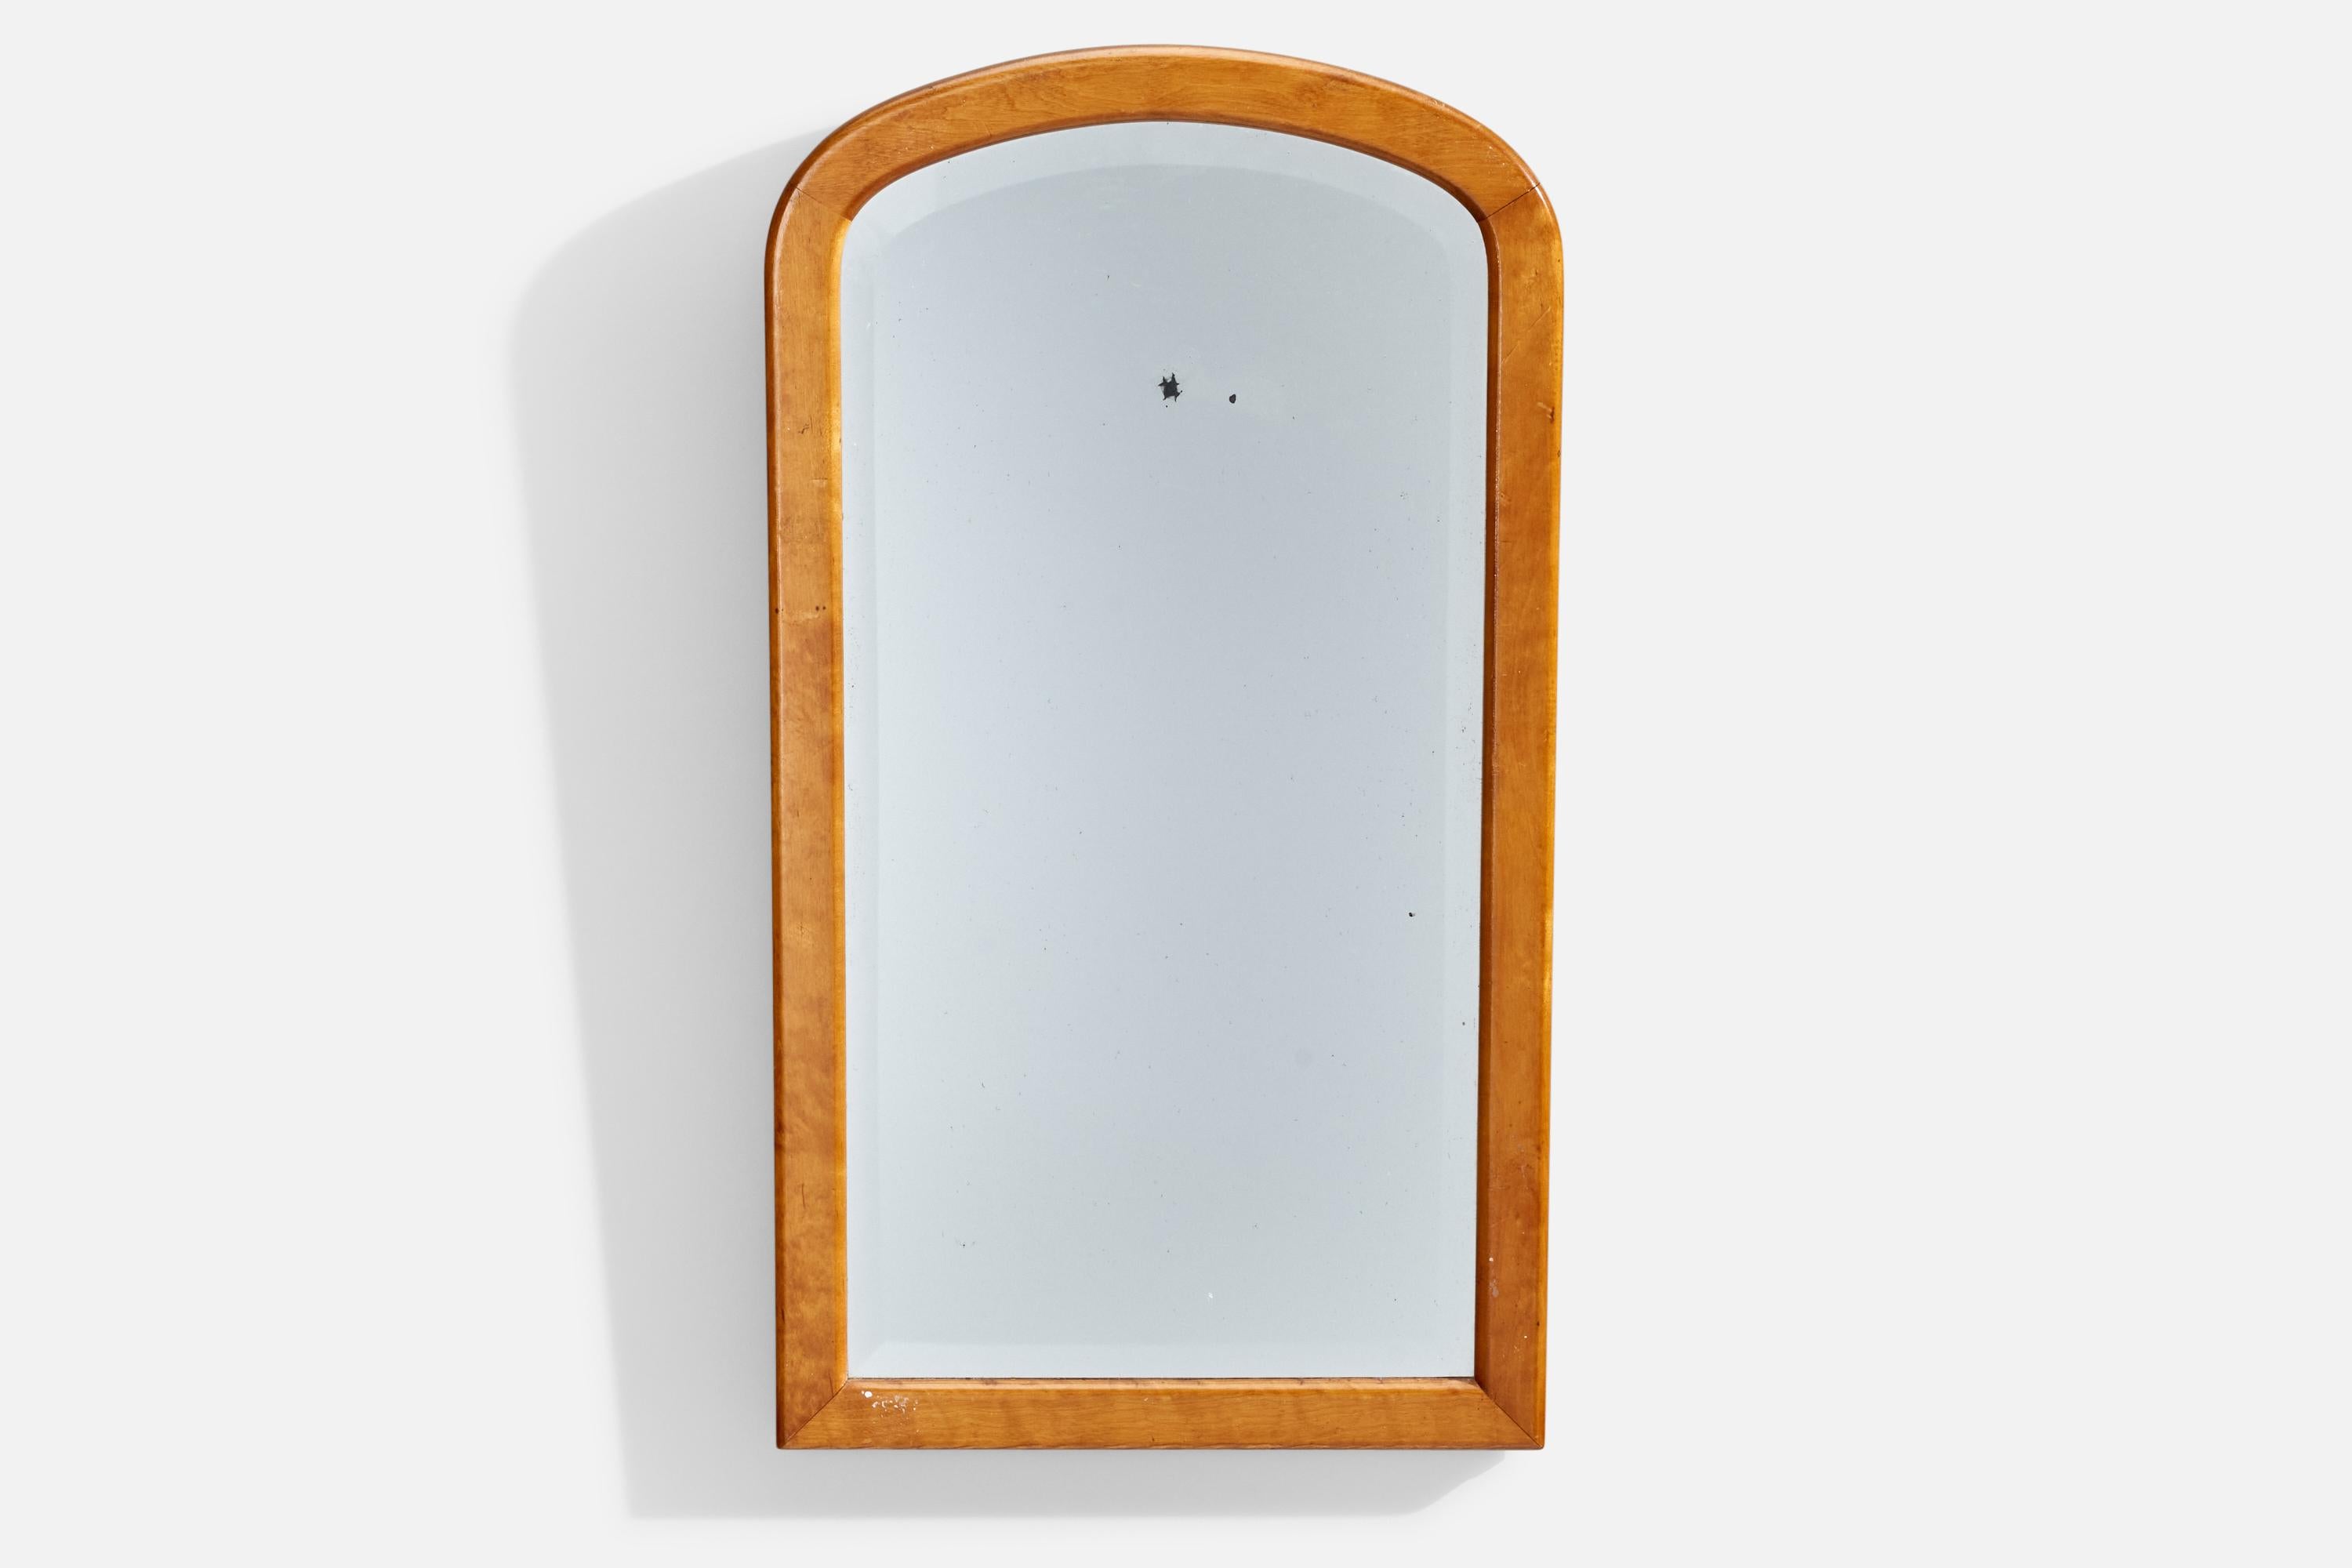 A birch wall mirror designed and produced in Sweden, c. 1920s.